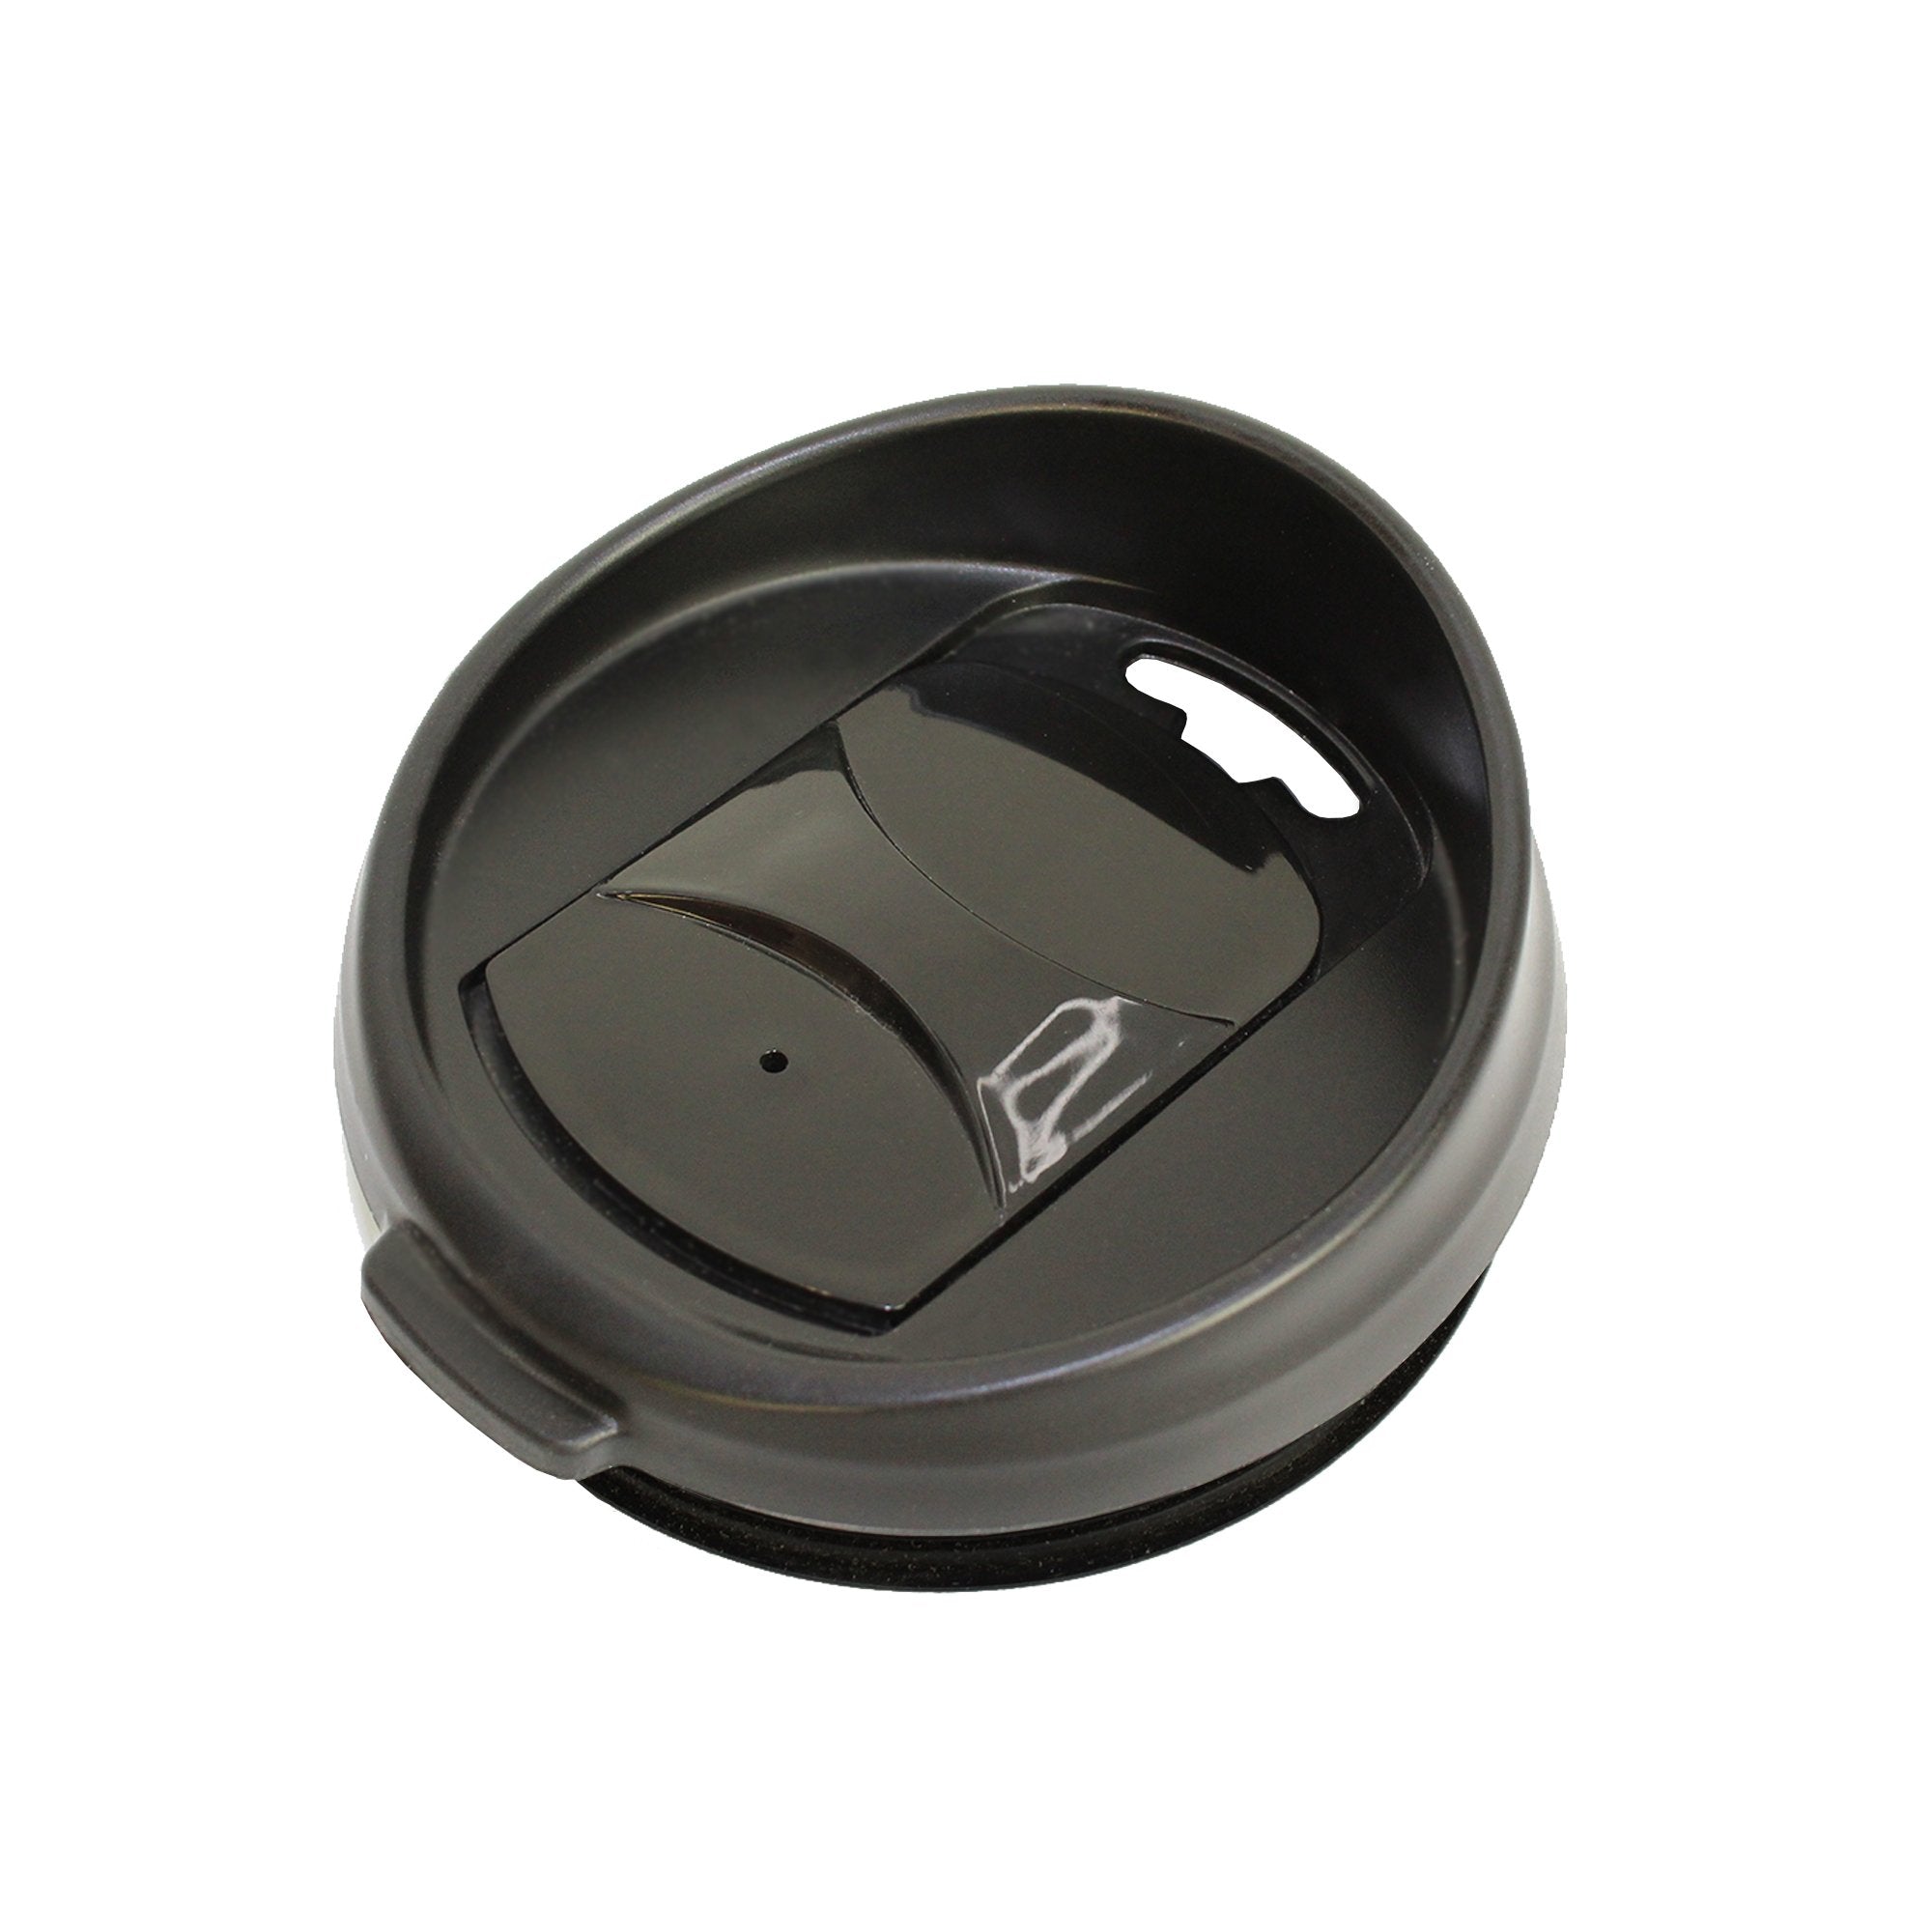 Replacement Studded Tumbler Lid for Starbucks Studded Tumblers